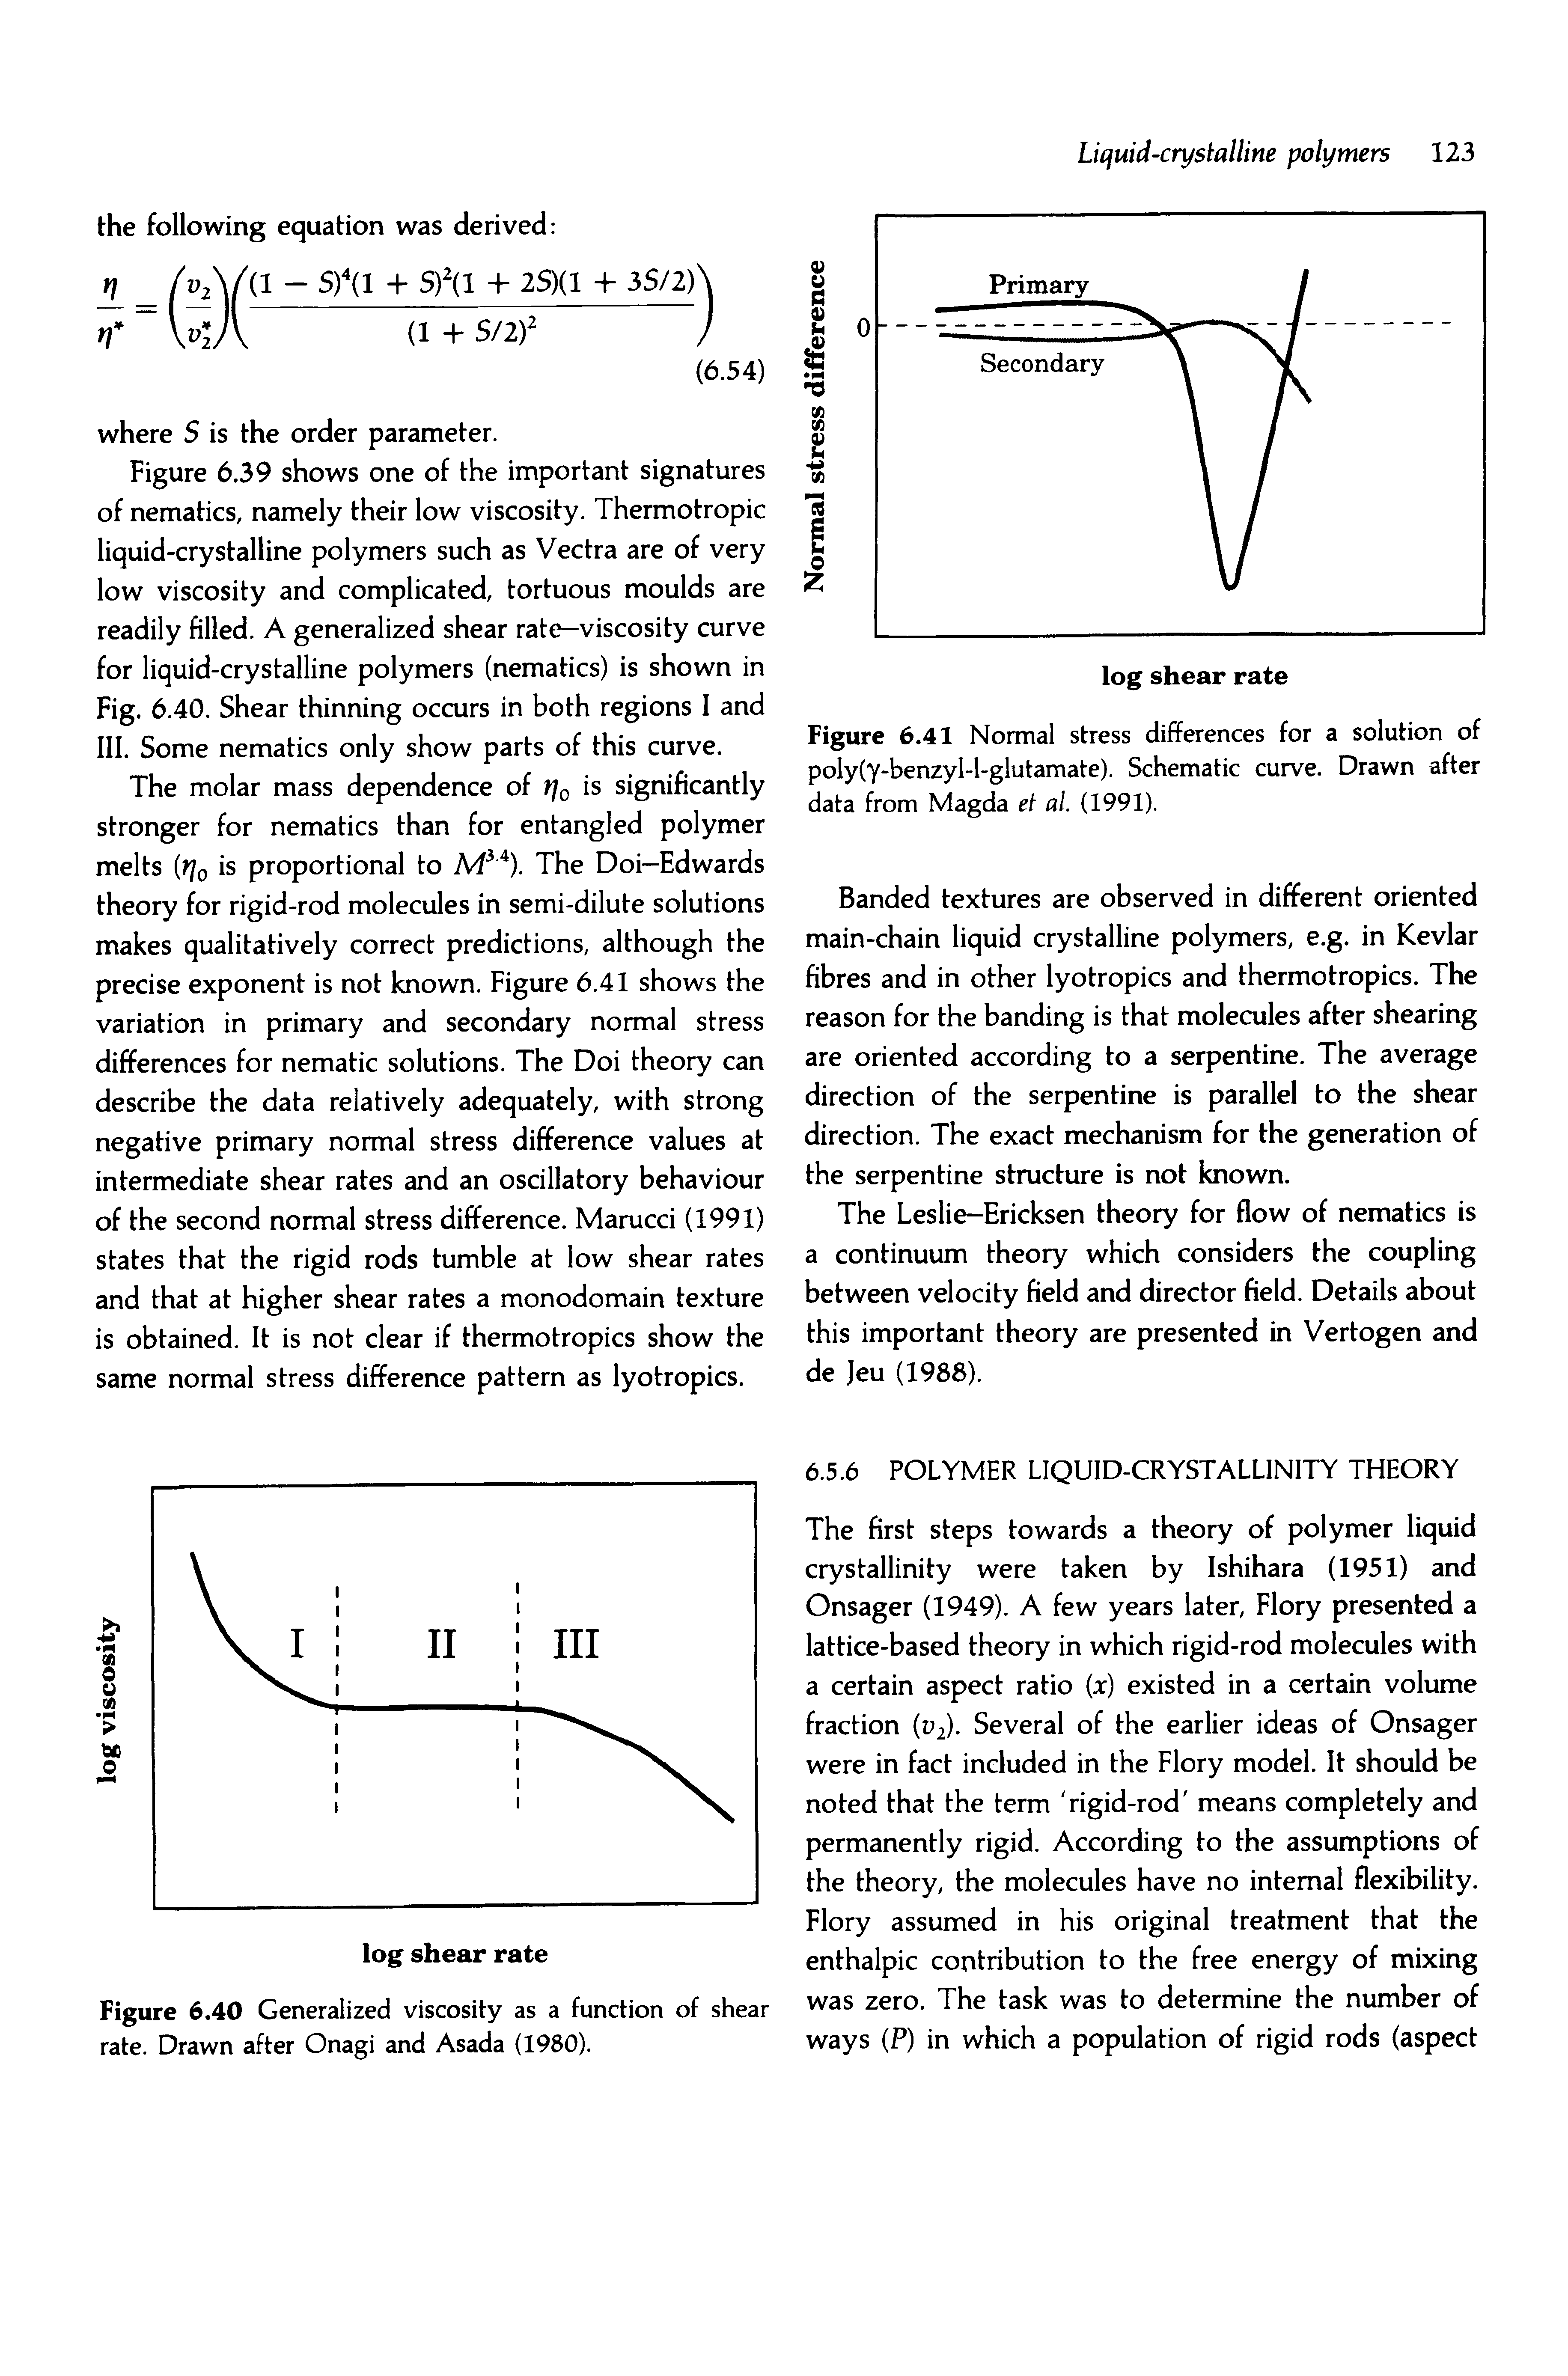 Figure 6.39 shows one of the important signatures of nematics, namely their low viscosity. Thermotropic liquid-crystalline polymers such as Vectra are of very low viscosity and complicated, tortuous moulds are readily filled. A generalized shear rate-viscosity curve for liquid-crystalline polymers (nematics) is shown in Fig. 6.40. Shear thinning occurs in both regions I and III. Some nematics only show parts of this curve.